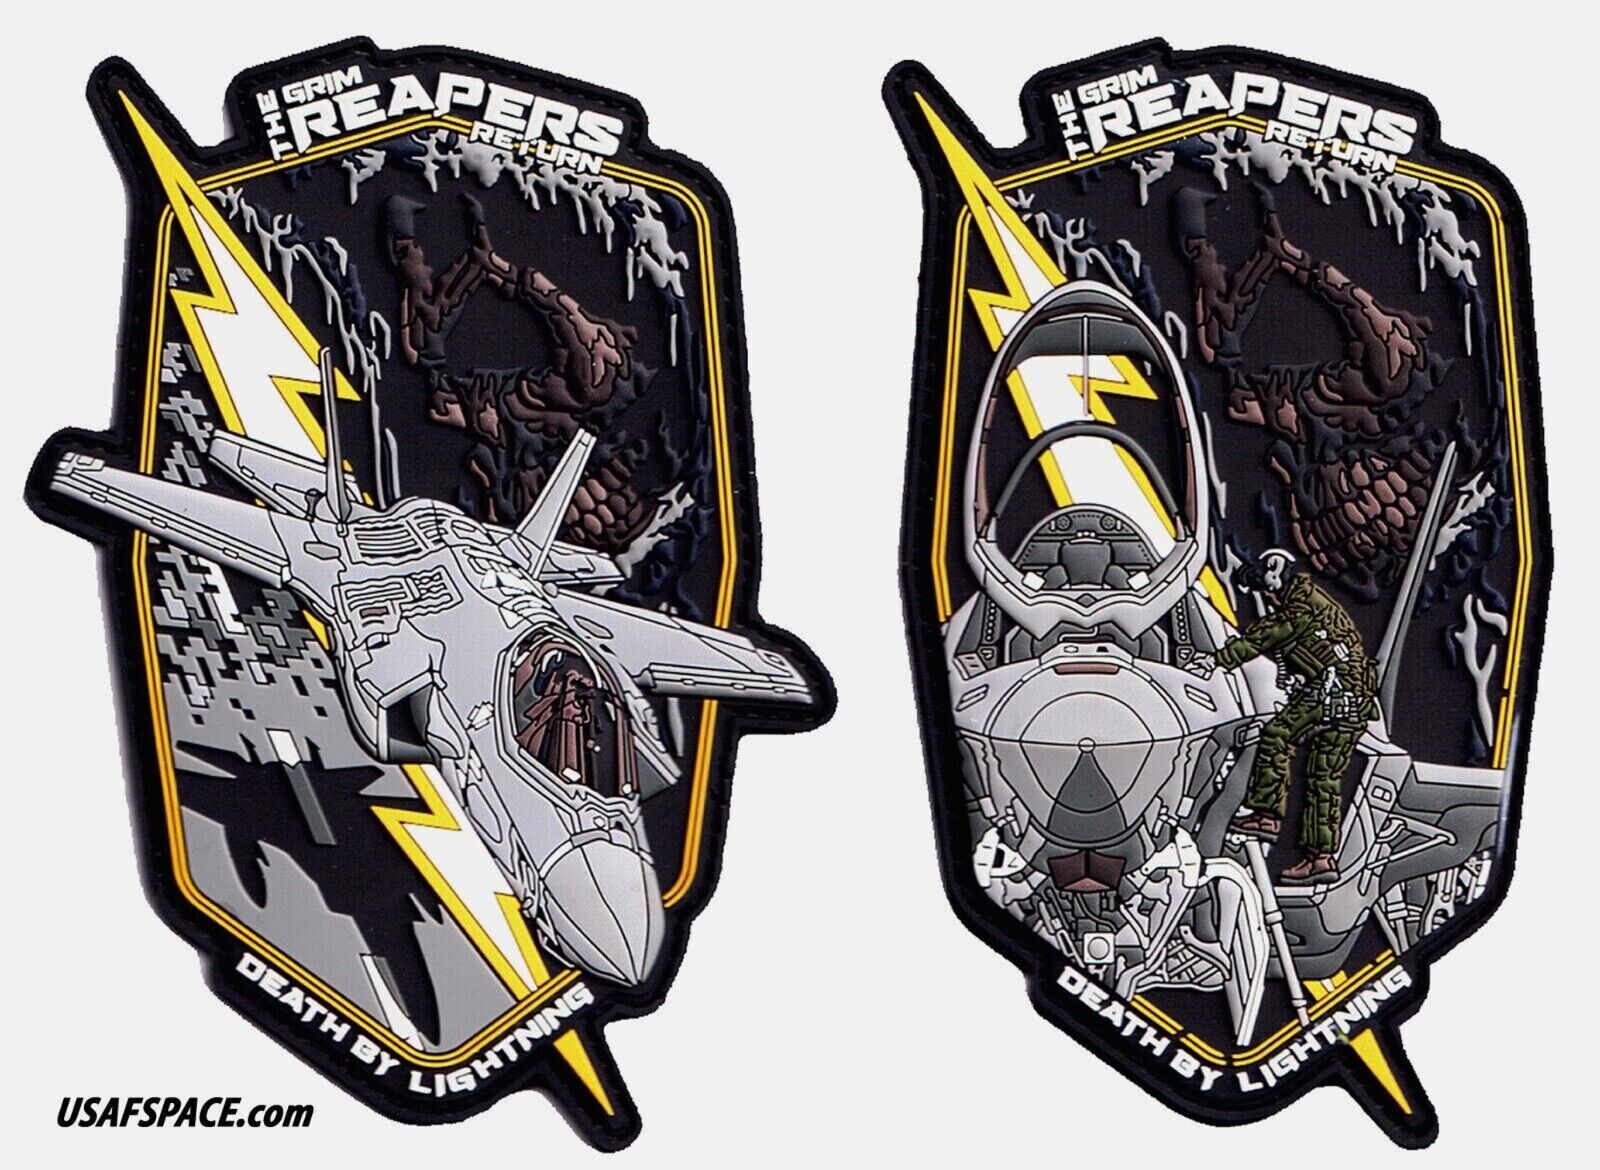 USAF 493RD FIGHTER SQ-F-35A-GRIM REAPERS -DEATH BY LIGHTNING- ORIGINAL PATCH SET